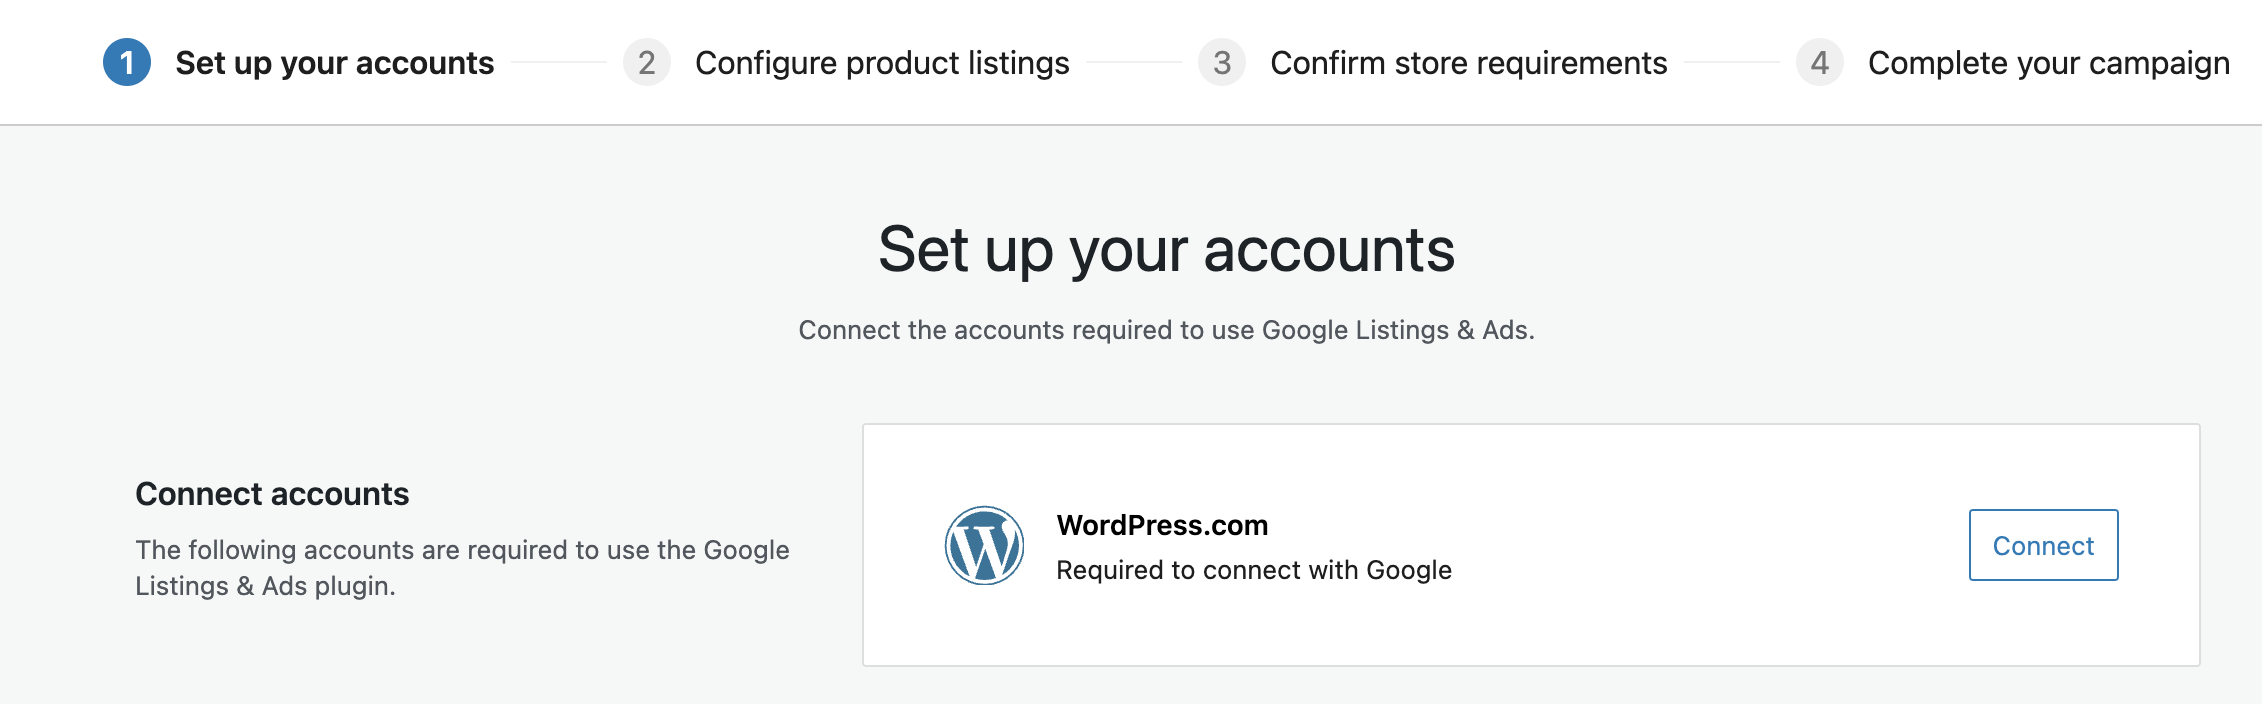 Screen shot of connecting Google Listings &amp;amp;amp;amp;amp;amp;amp;amp;amp;amp;amp;amp;amp;amp;amp;amp;amp;amp;amp;amp;amp;amp;amp;amp;amp;amp;amp;amp;amp;amp;amp;amp;amp;amp;amp;amp;amp;amp;amp;amp;amp;amp;amp;amp;amp;amp;amp;amp;amp;amp;amp;amp;amp;amp;amp;amp;amp;amp;amp;amp;amp;amp;amp;amp;amp;amp;amp;amp;amp;amp;amp;amp;amp;amp;amp;amp;amp;amp;amp;amp;amp;amp;amp;amp;amp;amp;amp;amp;amp;amp;amp;amp;amp;amp;amp;amp;amp;amp;amp;amp;amp;amp;amp;amp;amp;amp;amp;amp;amp;amp;amp;amp;amp;amp;amp;amp;amp;amp;amp;amp;amp;amp;amp;amp;amp;amp;amp;amp;amp;amp;amp;amp;amp;amp;amp;amp;amp;amp;amp;amp;amp;amp;amp;amp;amp;amp;amp;amp;amp;amp;amp;amp;amp;amp;amp;amp;amp;amp;amp;amp;amp;amp;amp;amp;amp;amp;amp;amp;amp;amp;amp;amp;amp;amp;amp;amp;amp;amp;amp;amp;amp;amp; Ads PlugIn with WordPress